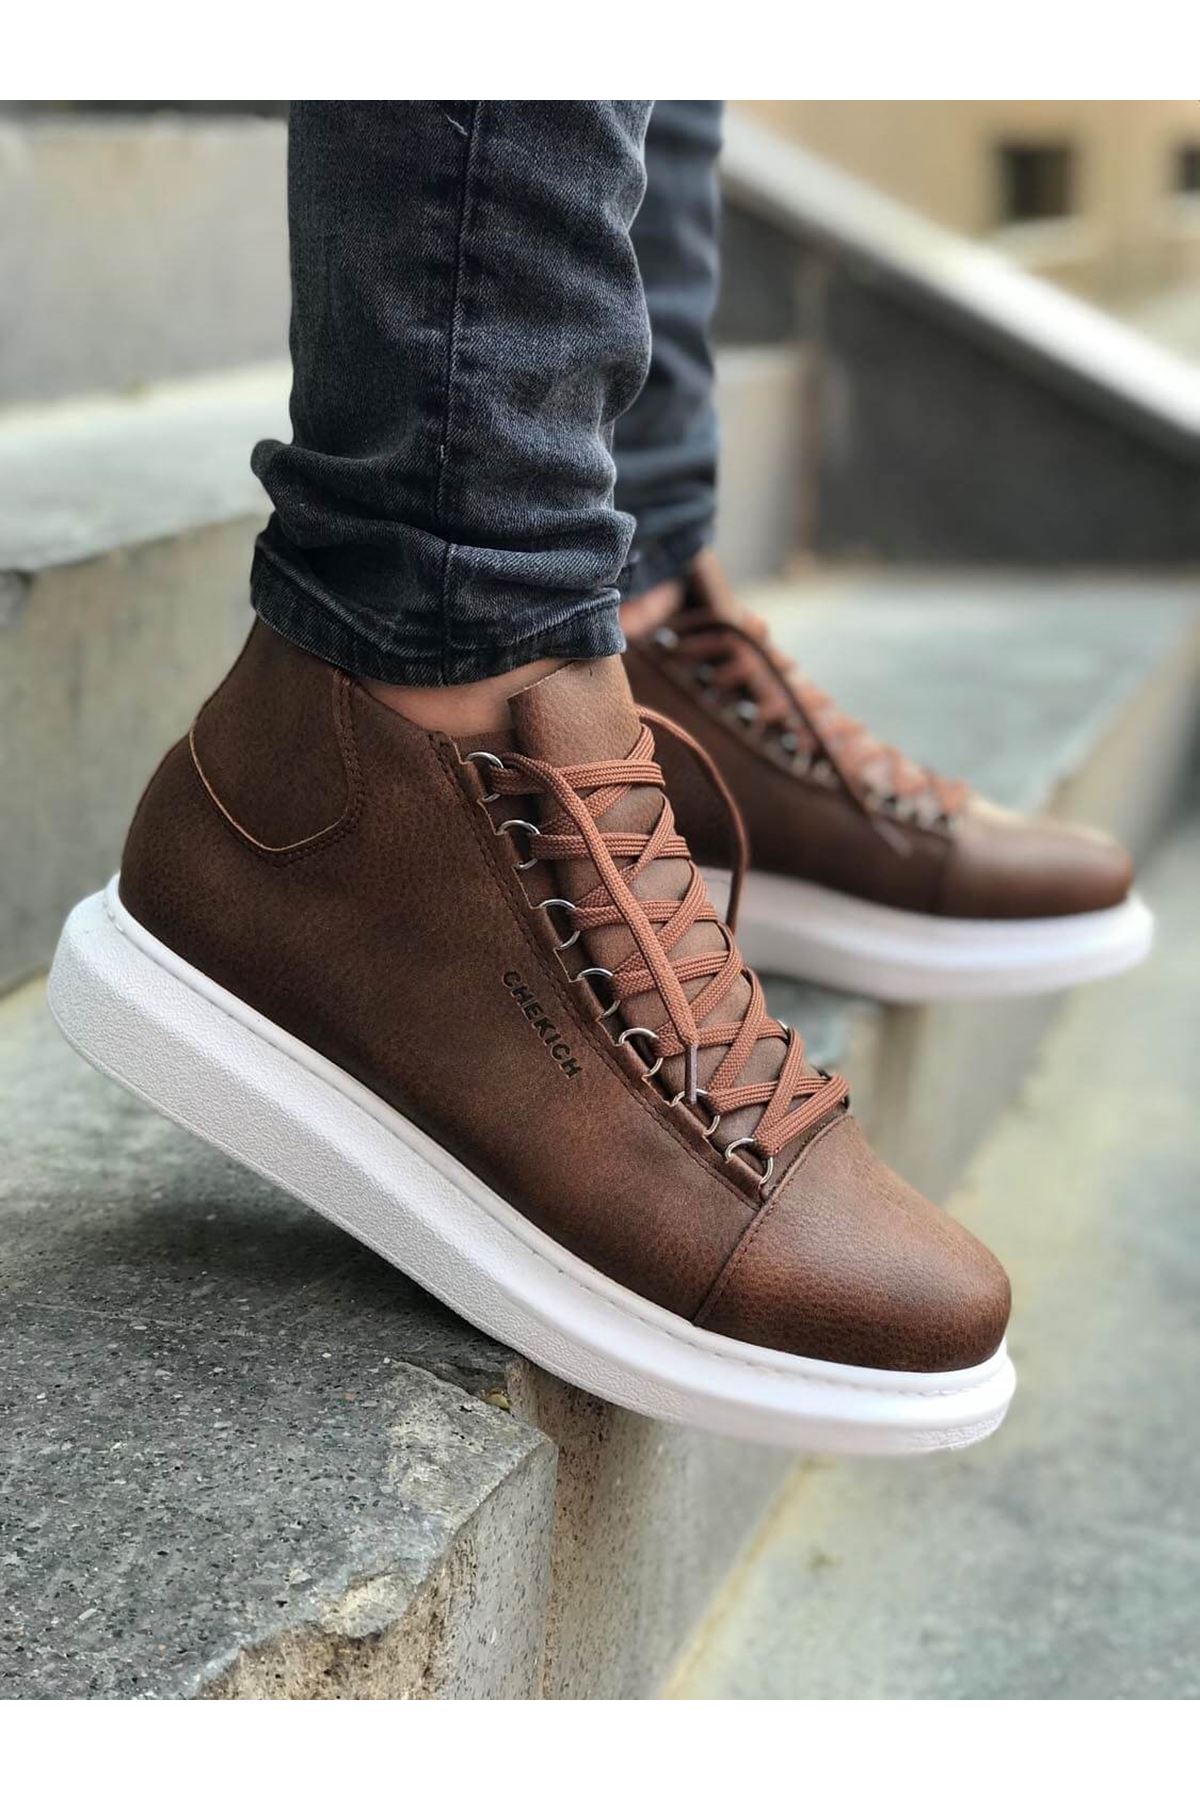 Chekich Men's Shoes Brown-Tan Non Leather Spring & Autumn Seasons Lace-Up Shoes Snow Ankle White Outsole Solid Unisex Women Boot Odorless High Top Unisex Big Sizes Footwear Daily Basic Platform Fashion Band CH258 V7